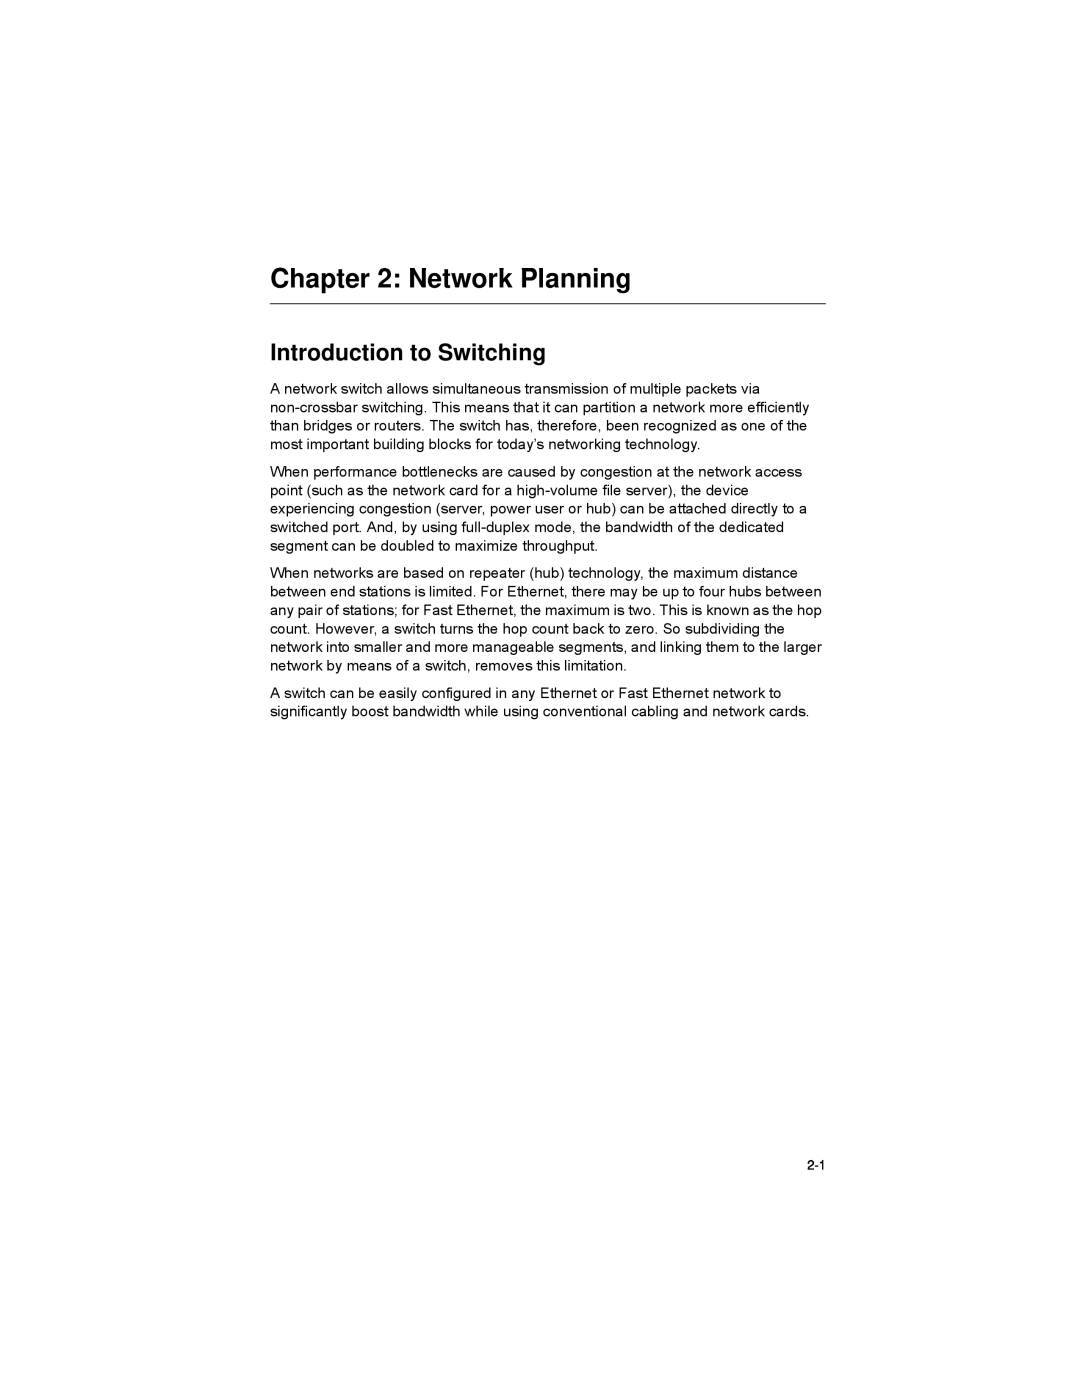 Alcatel-Lucent 6300-24 manual Network Planning, Introduction to Switching 